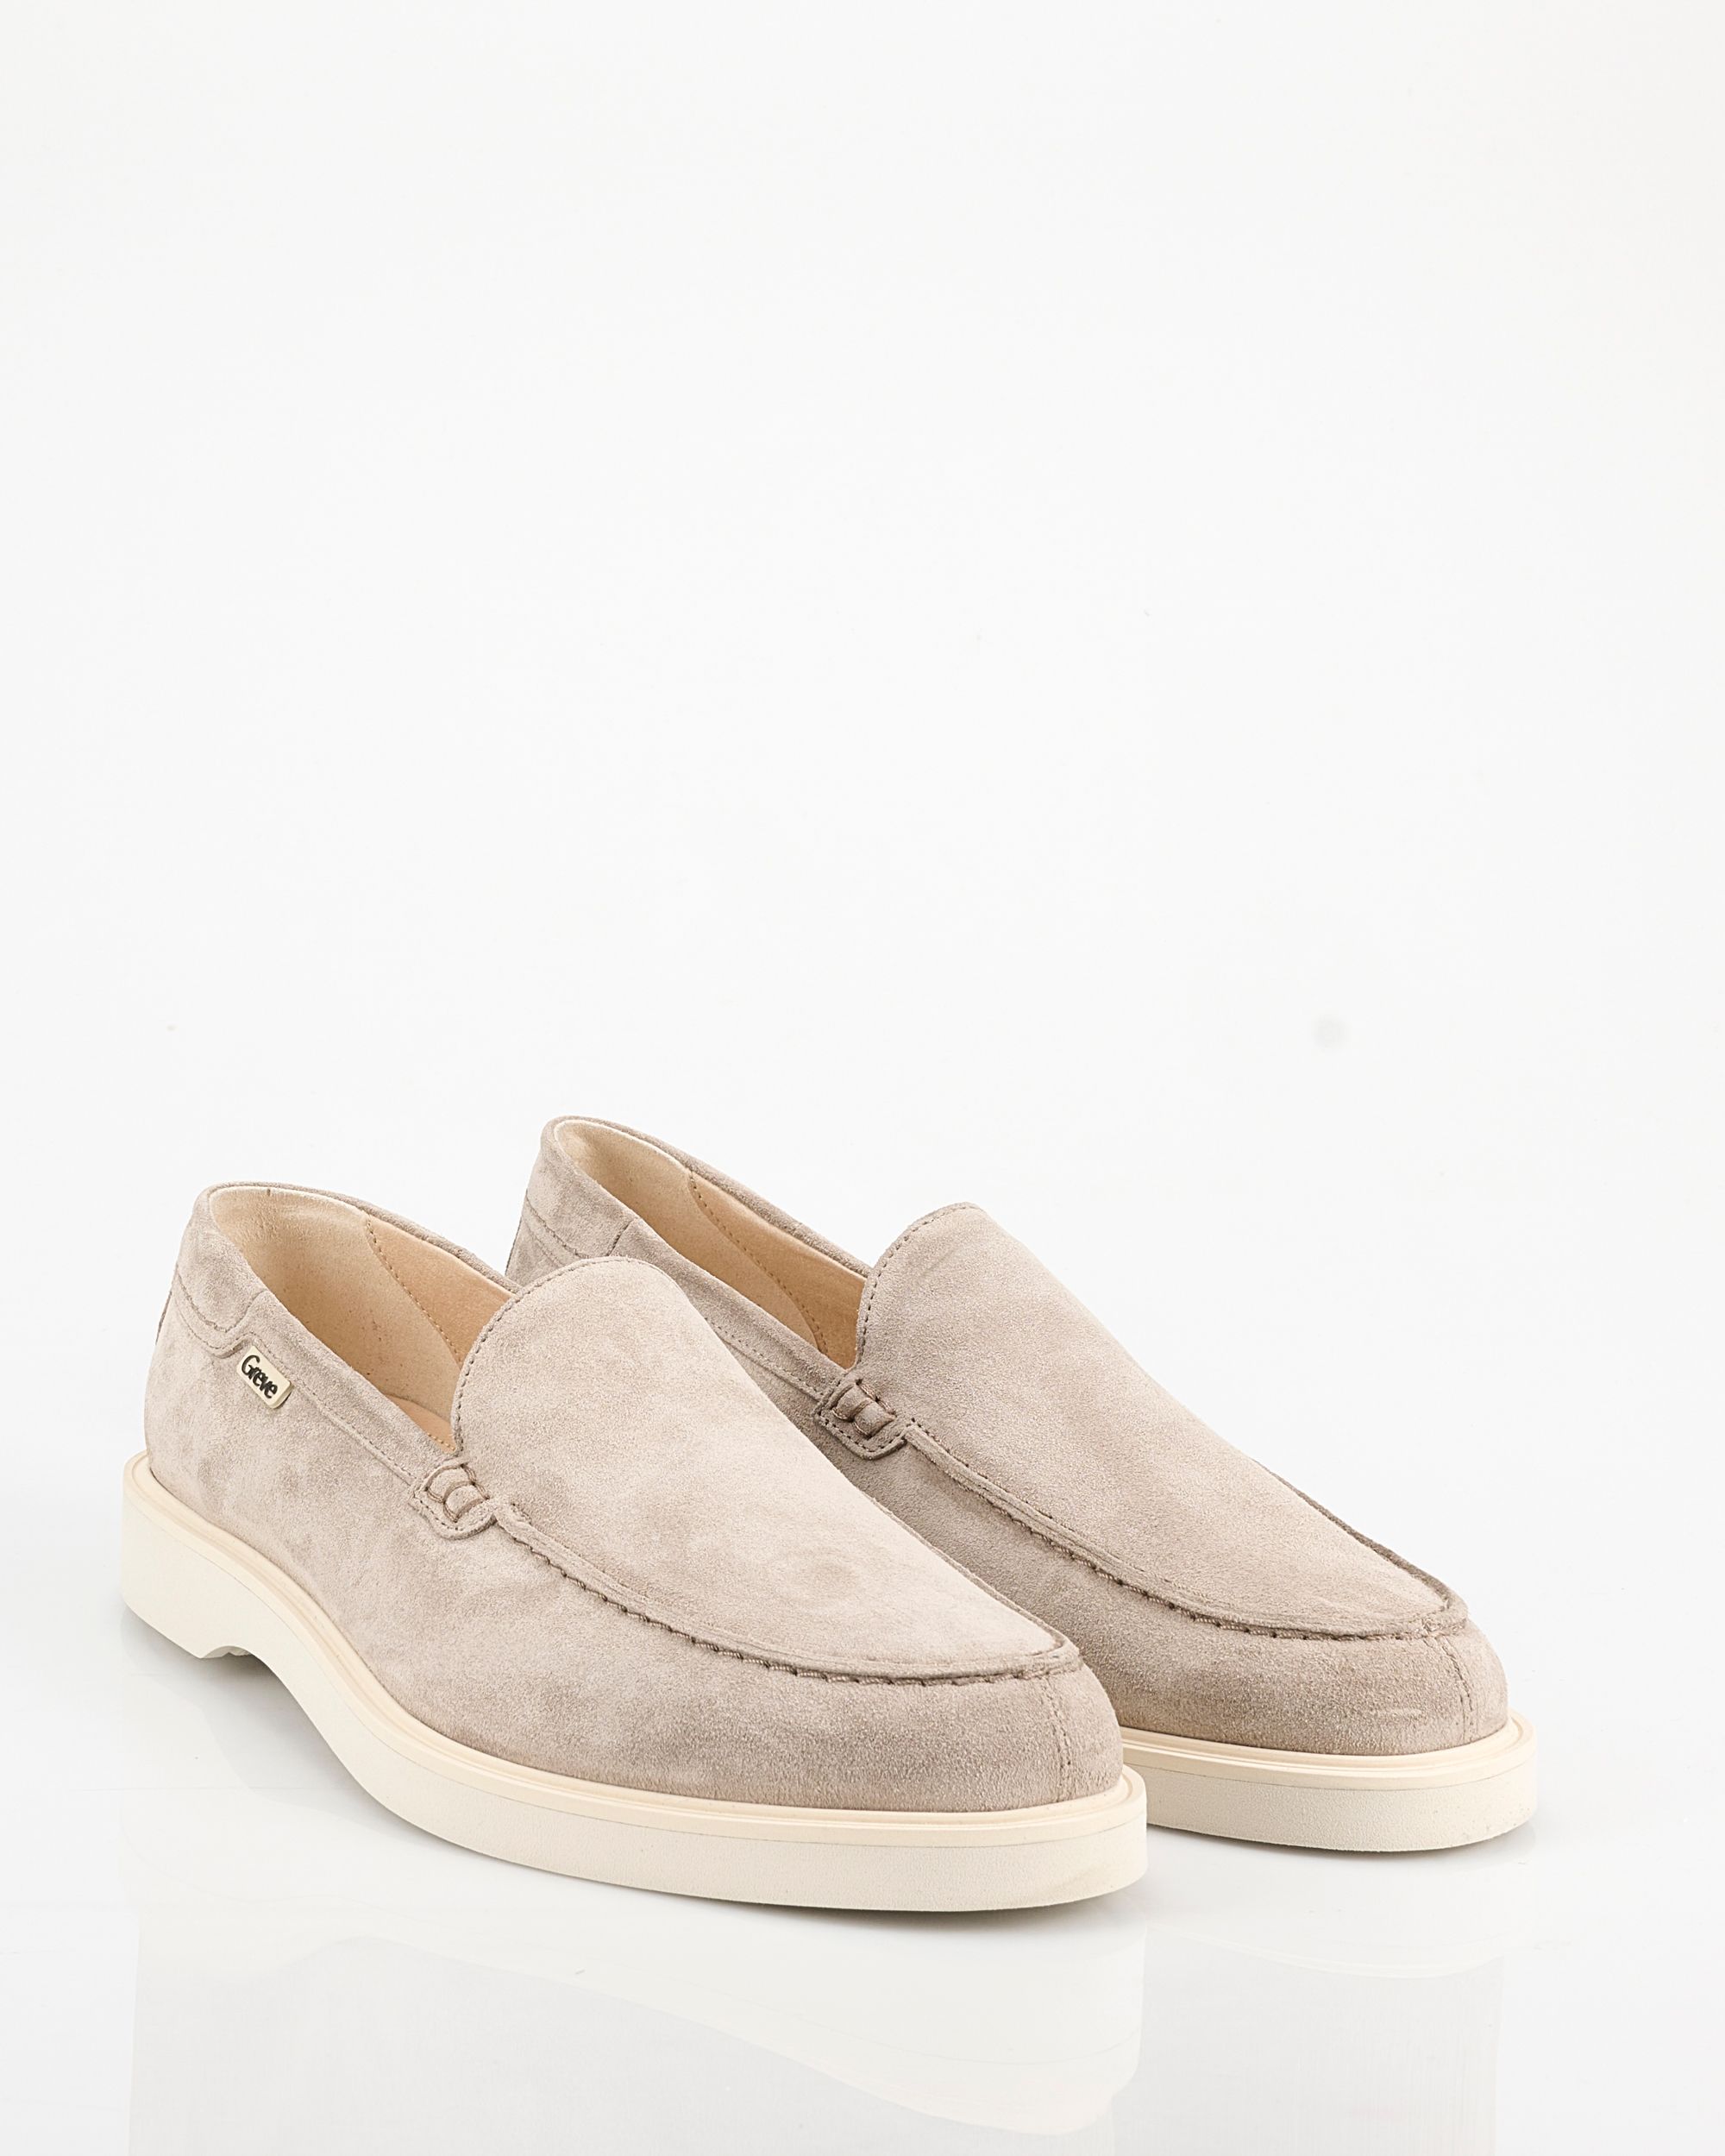 Greve Vito Loafers Beige 092115-001-41